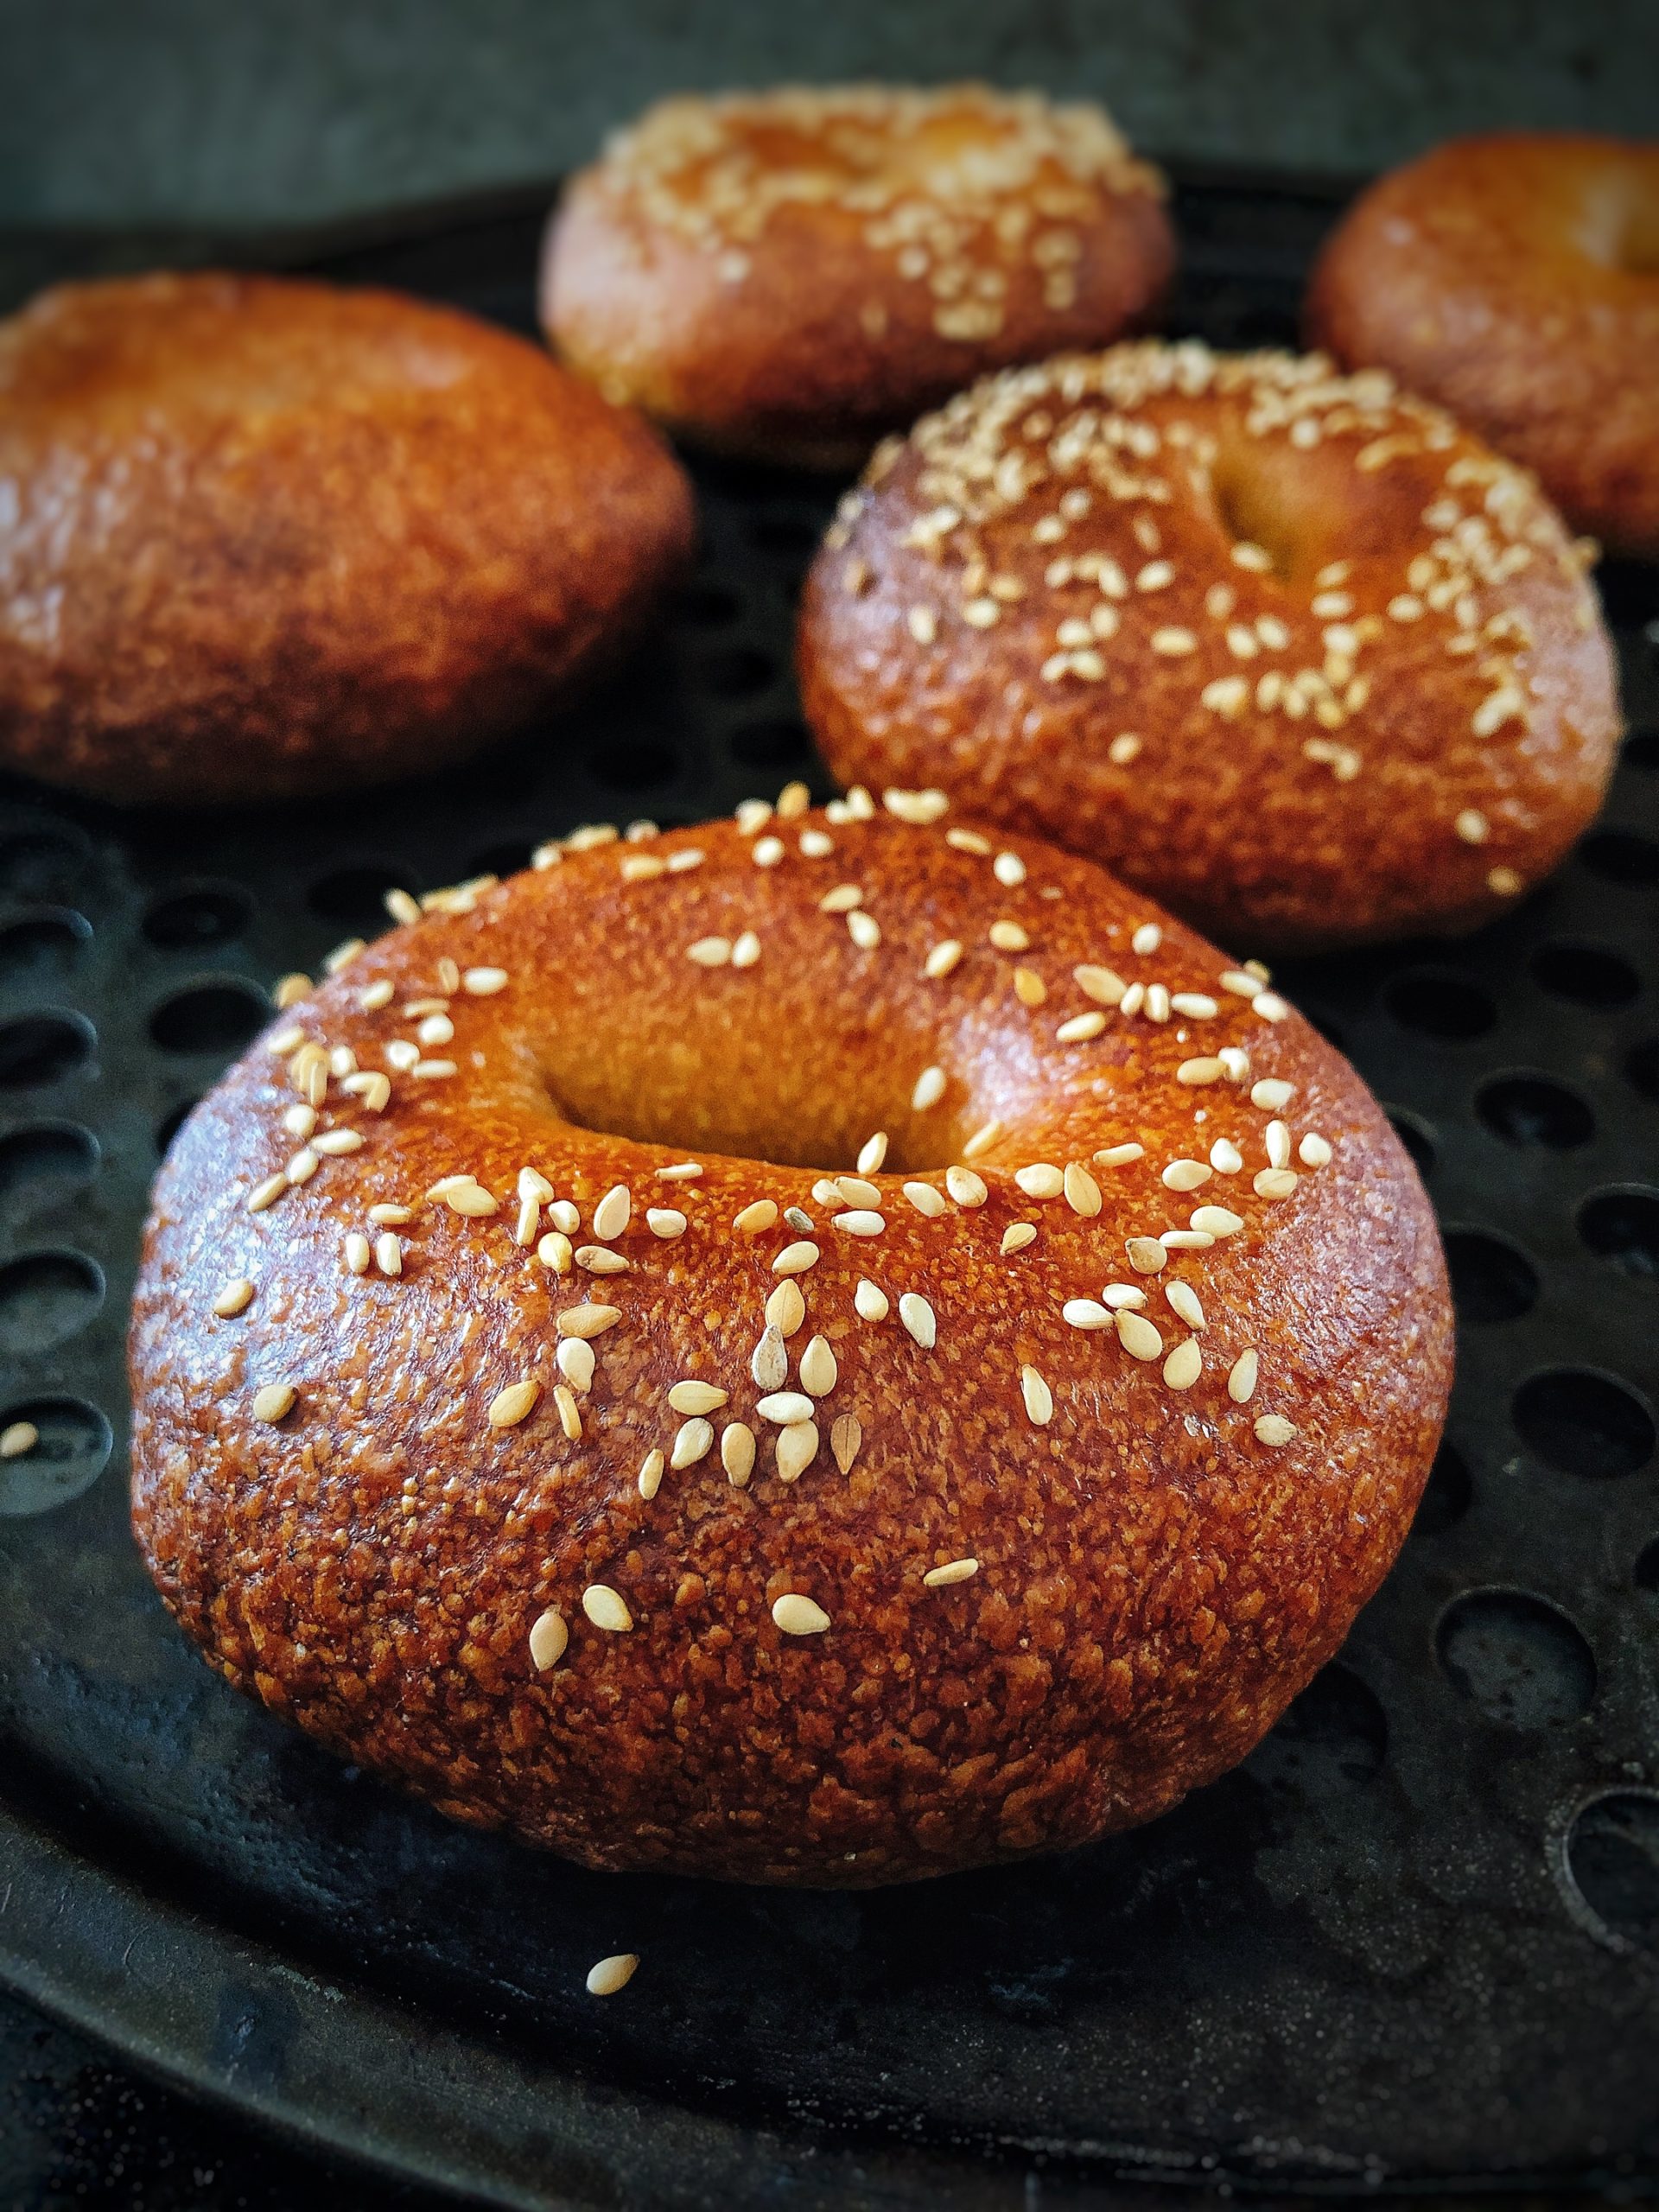 How to Make Bagels in a Stand Mixer